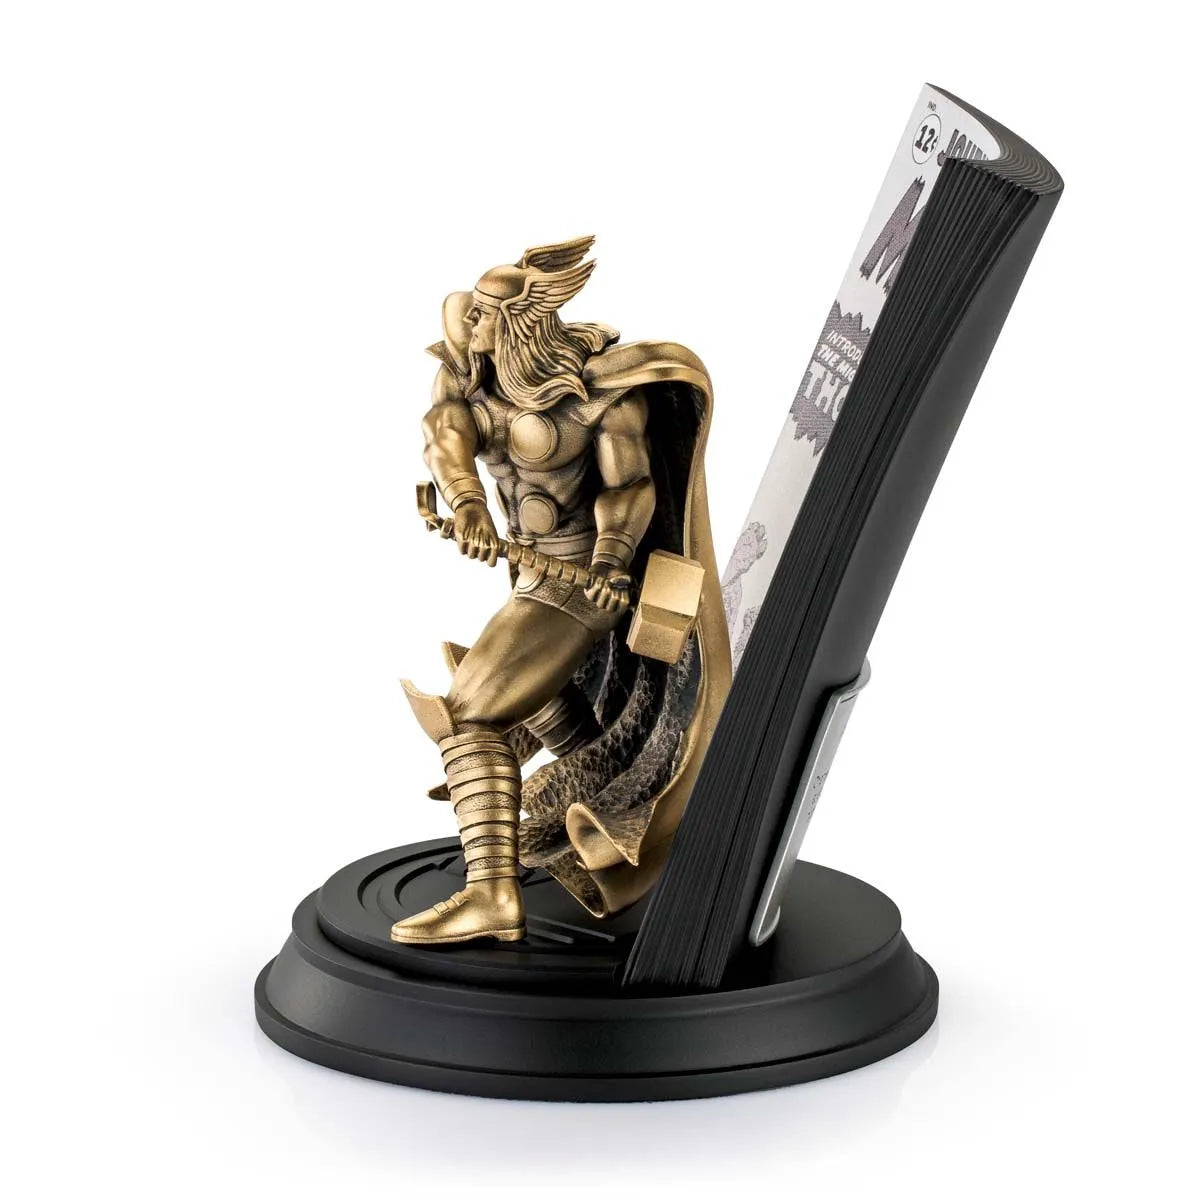 Thor Journey Into Mystery Volume 1 #83 Limited Edition Gilt Statue by Royal Selangor -Royal Selangor - India - www.superherotoystore.com